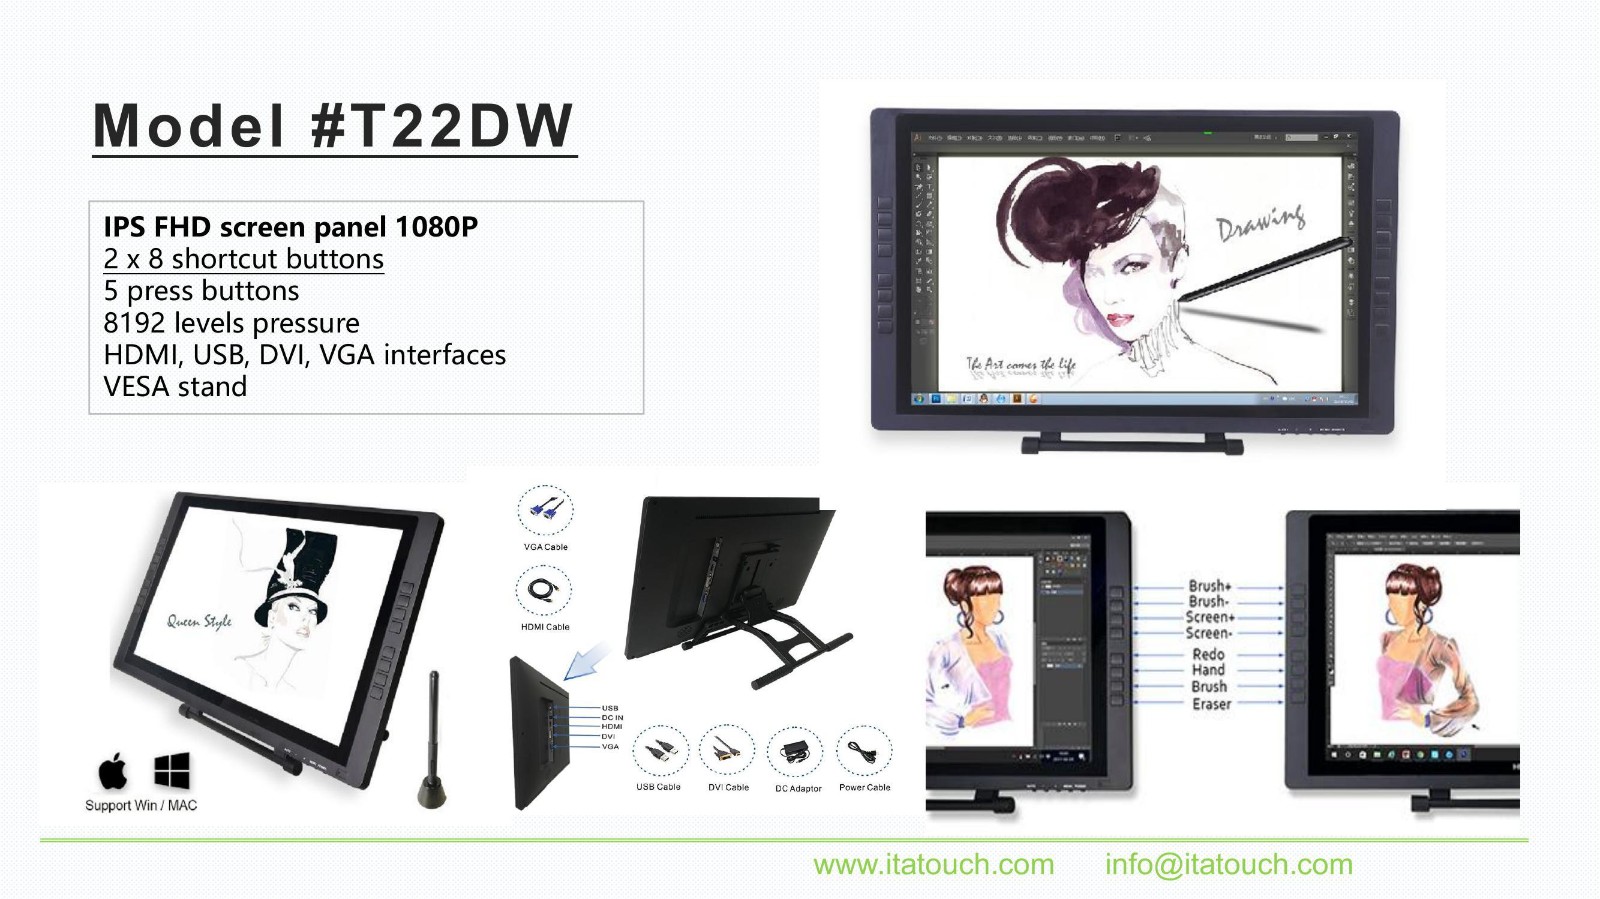 news-ITATOUCH-215INCH ELECTROMAGNETICAL ALL IN ONE DISPLAY-img-2